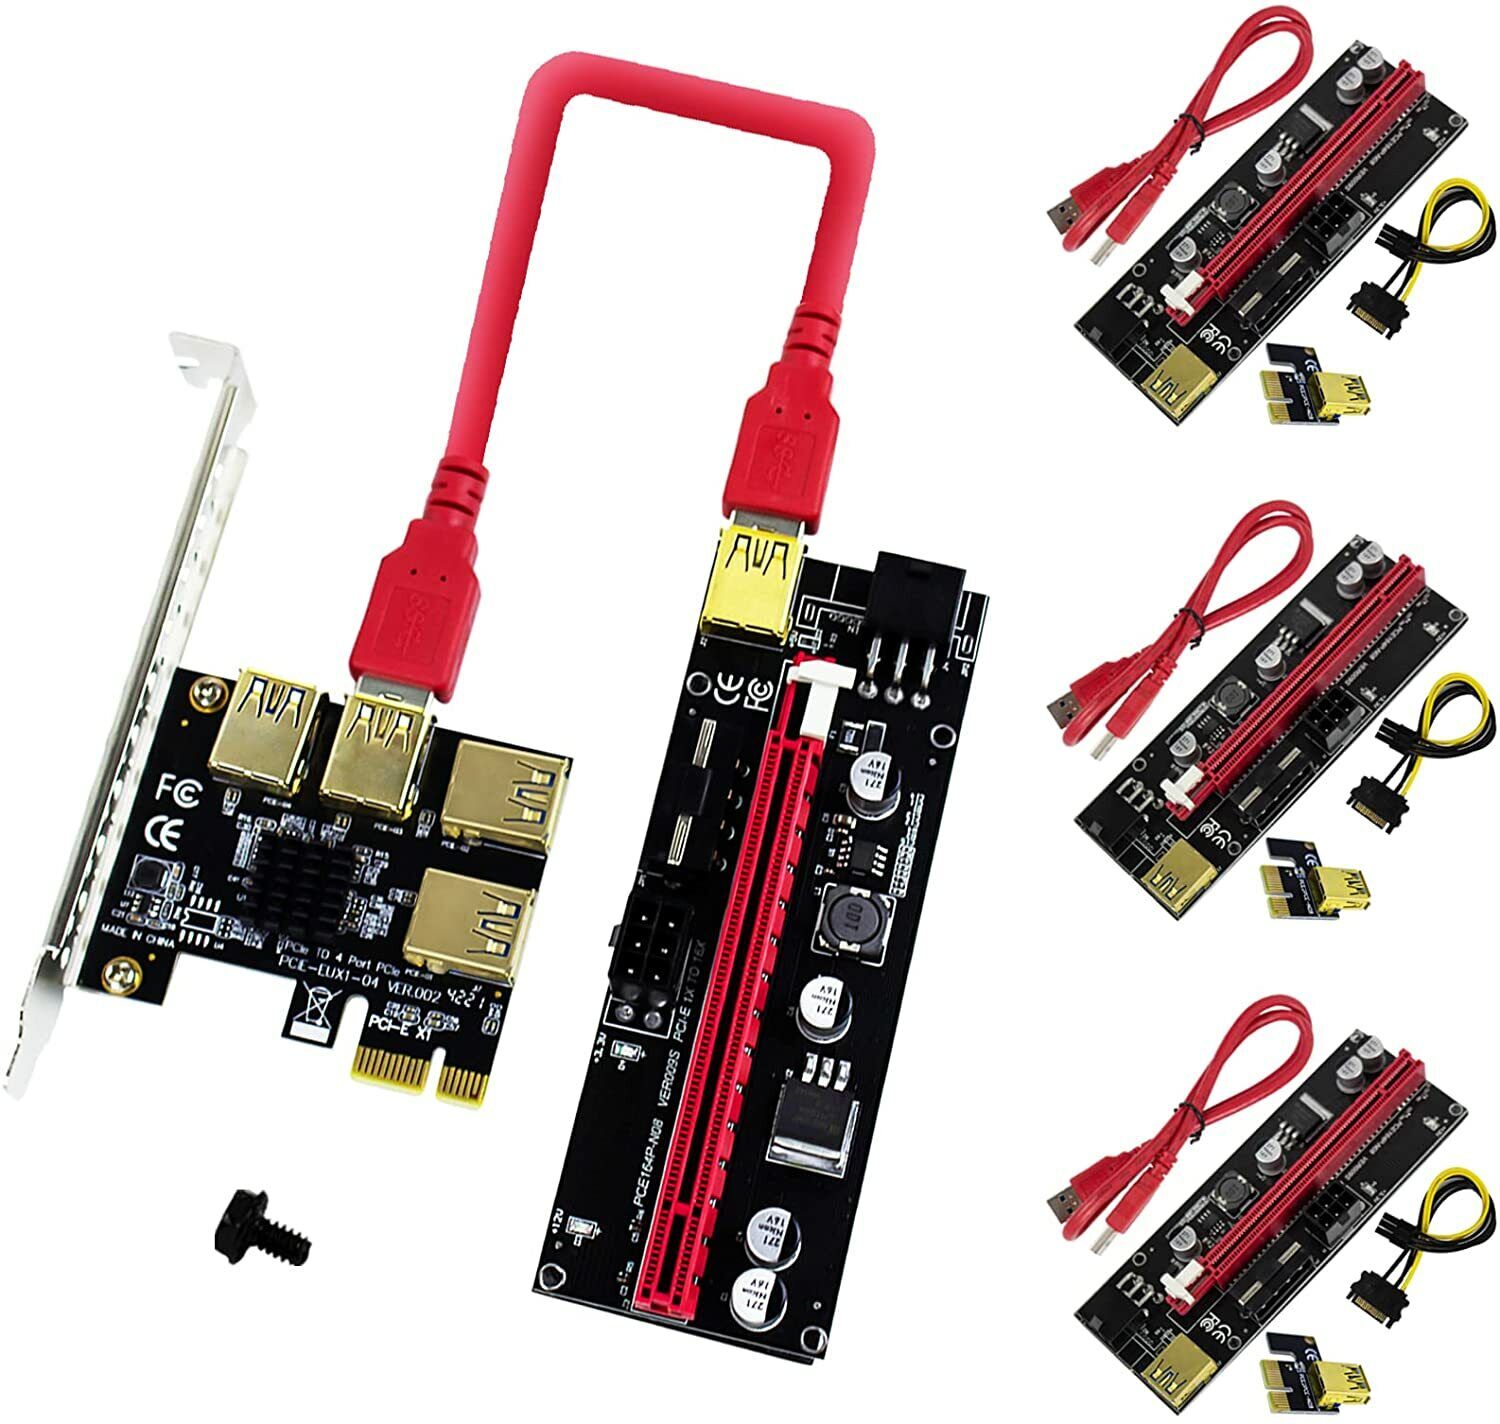 1x PCIE 1 to 4 Adapter Board & PCIE-VER009S Riser Adapter Card SATA Power Cable